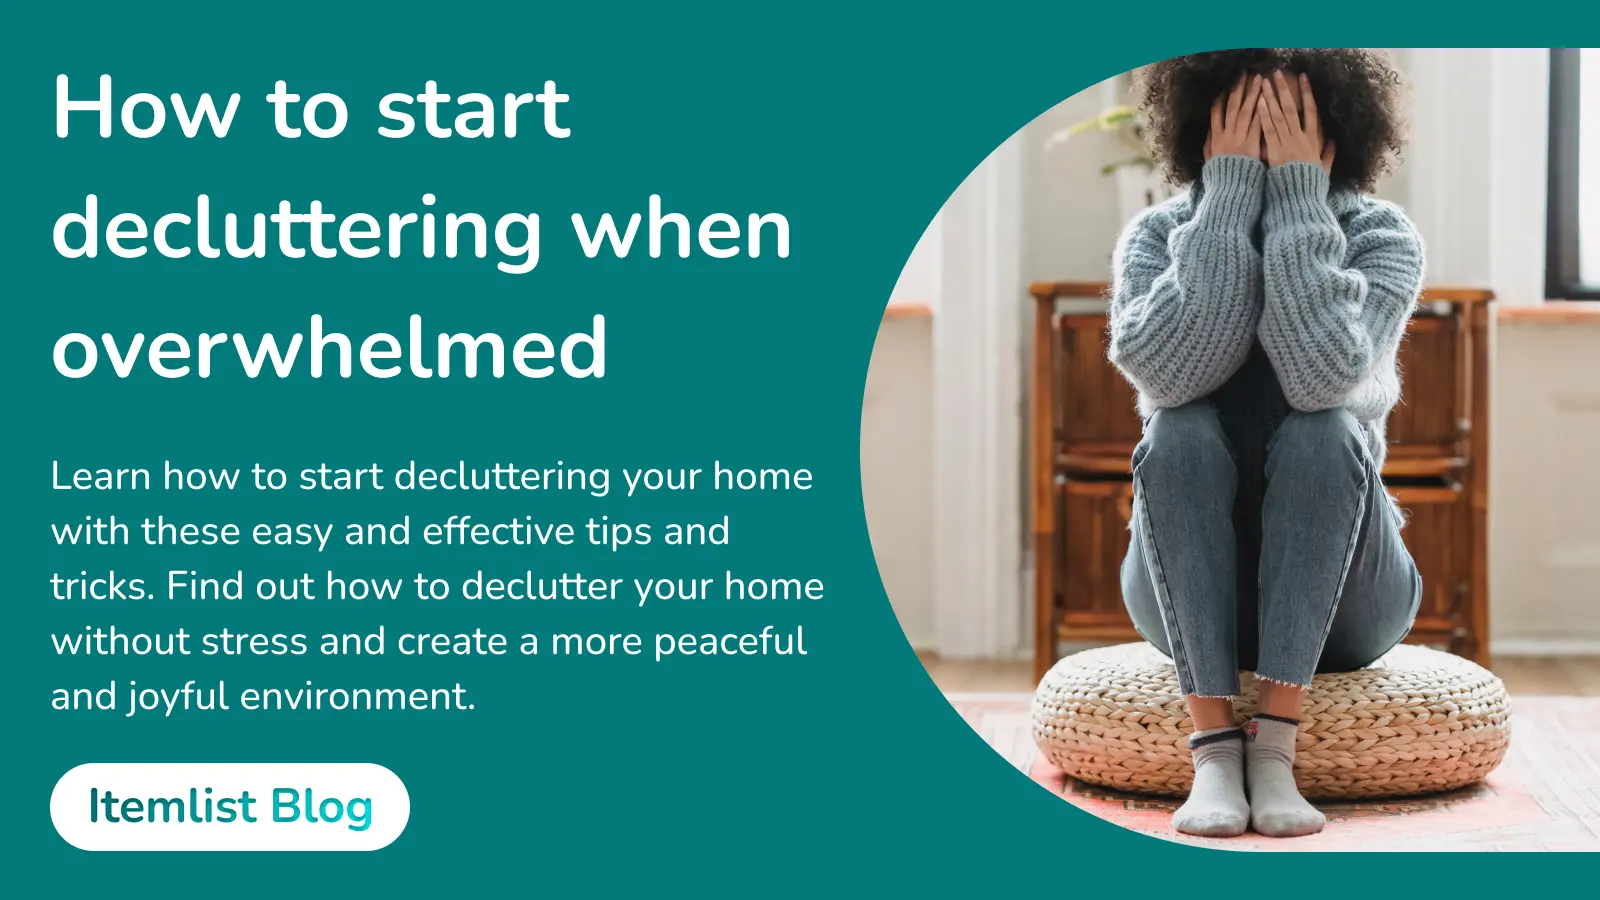 How to Start Decluttering when Overwhelmed (Useful Tips and Tricks)